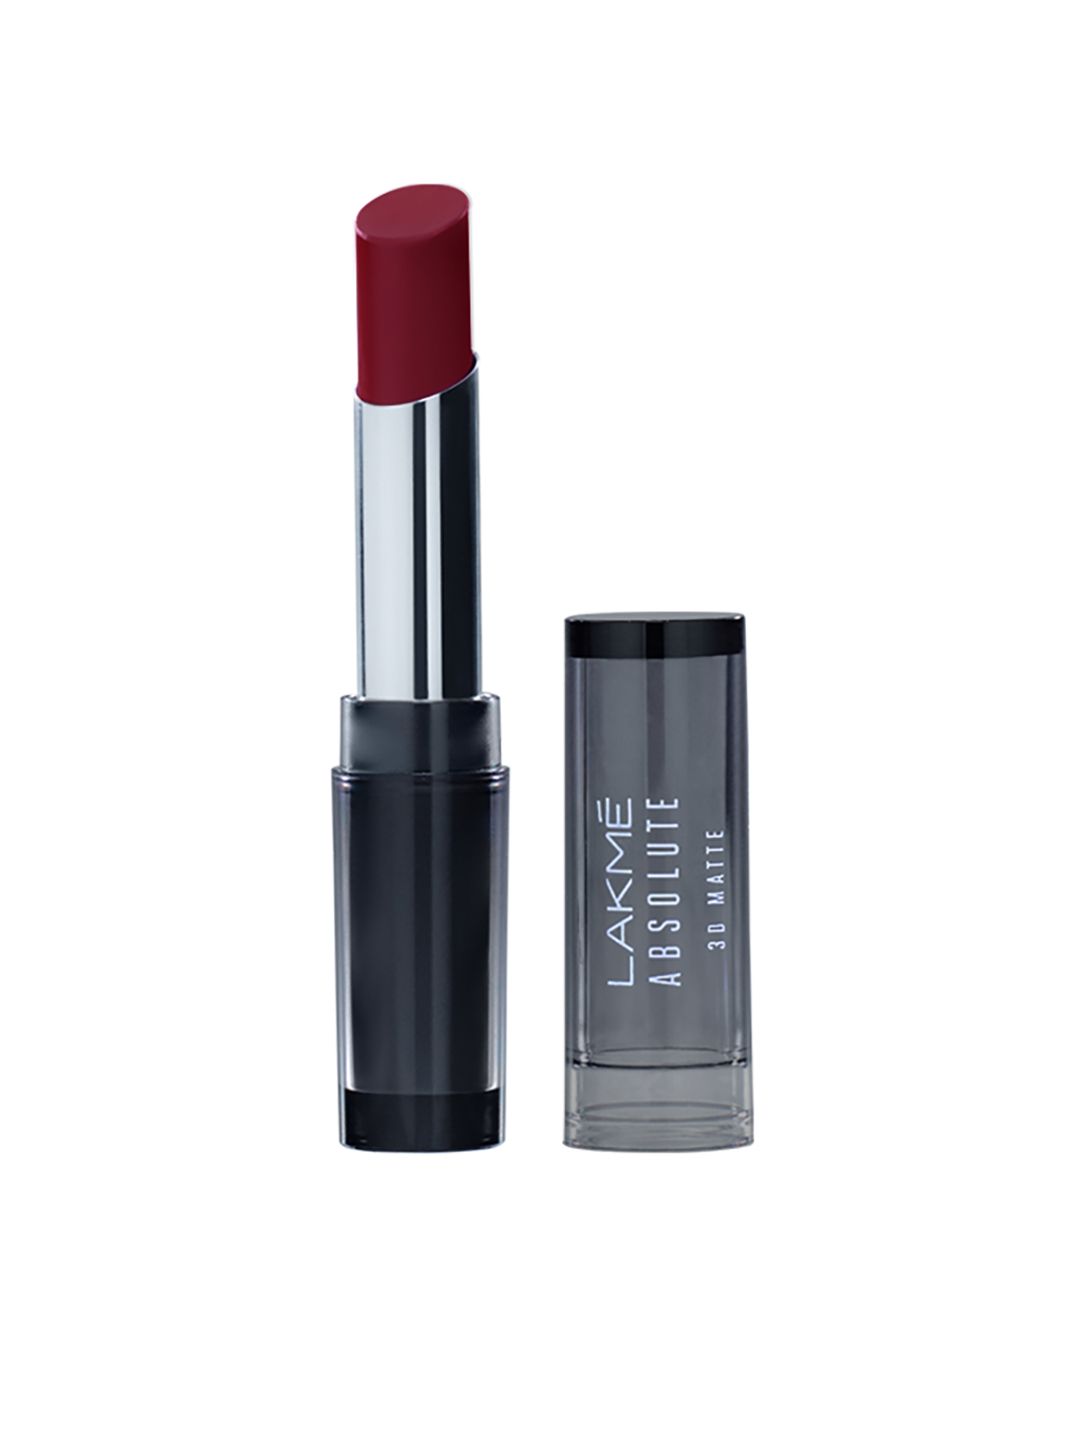 Lakme Absolute 3D Matte Lip Color - Wine Whisper 09 3.6 g Price in India